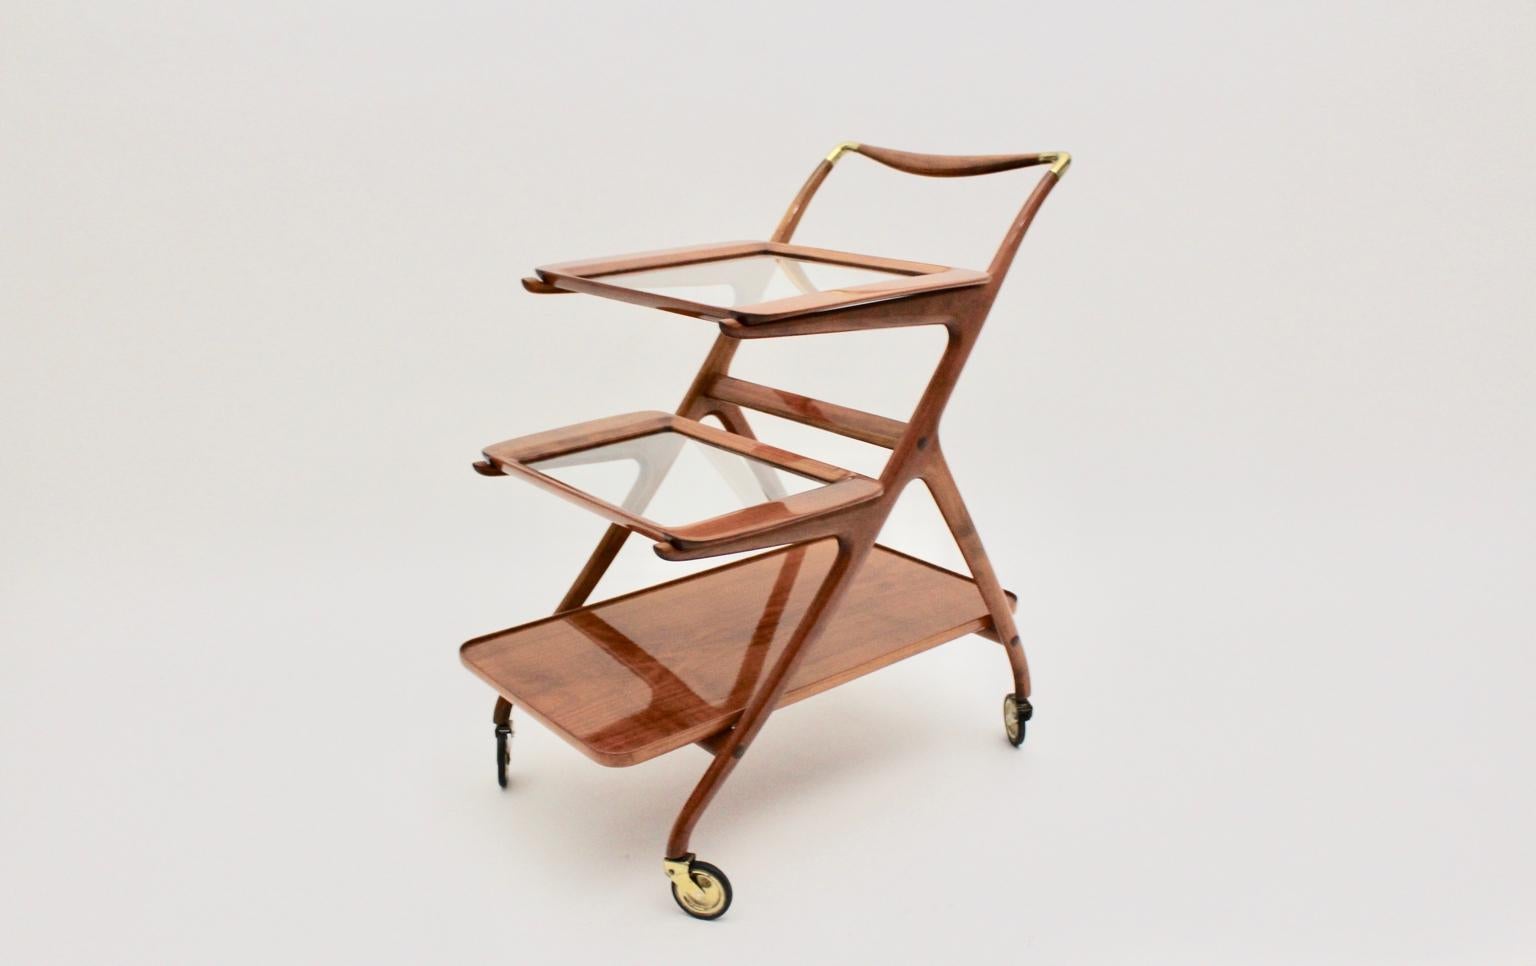 We present a Mid-Century Modern vintage bar cart by Ico Parisi, 1950s, Italy for De Baggis.
Furthermore the stunning construction was made of honey colored ashwood, four brass wheels and brass details.
Two glass plates and one bottom plate are